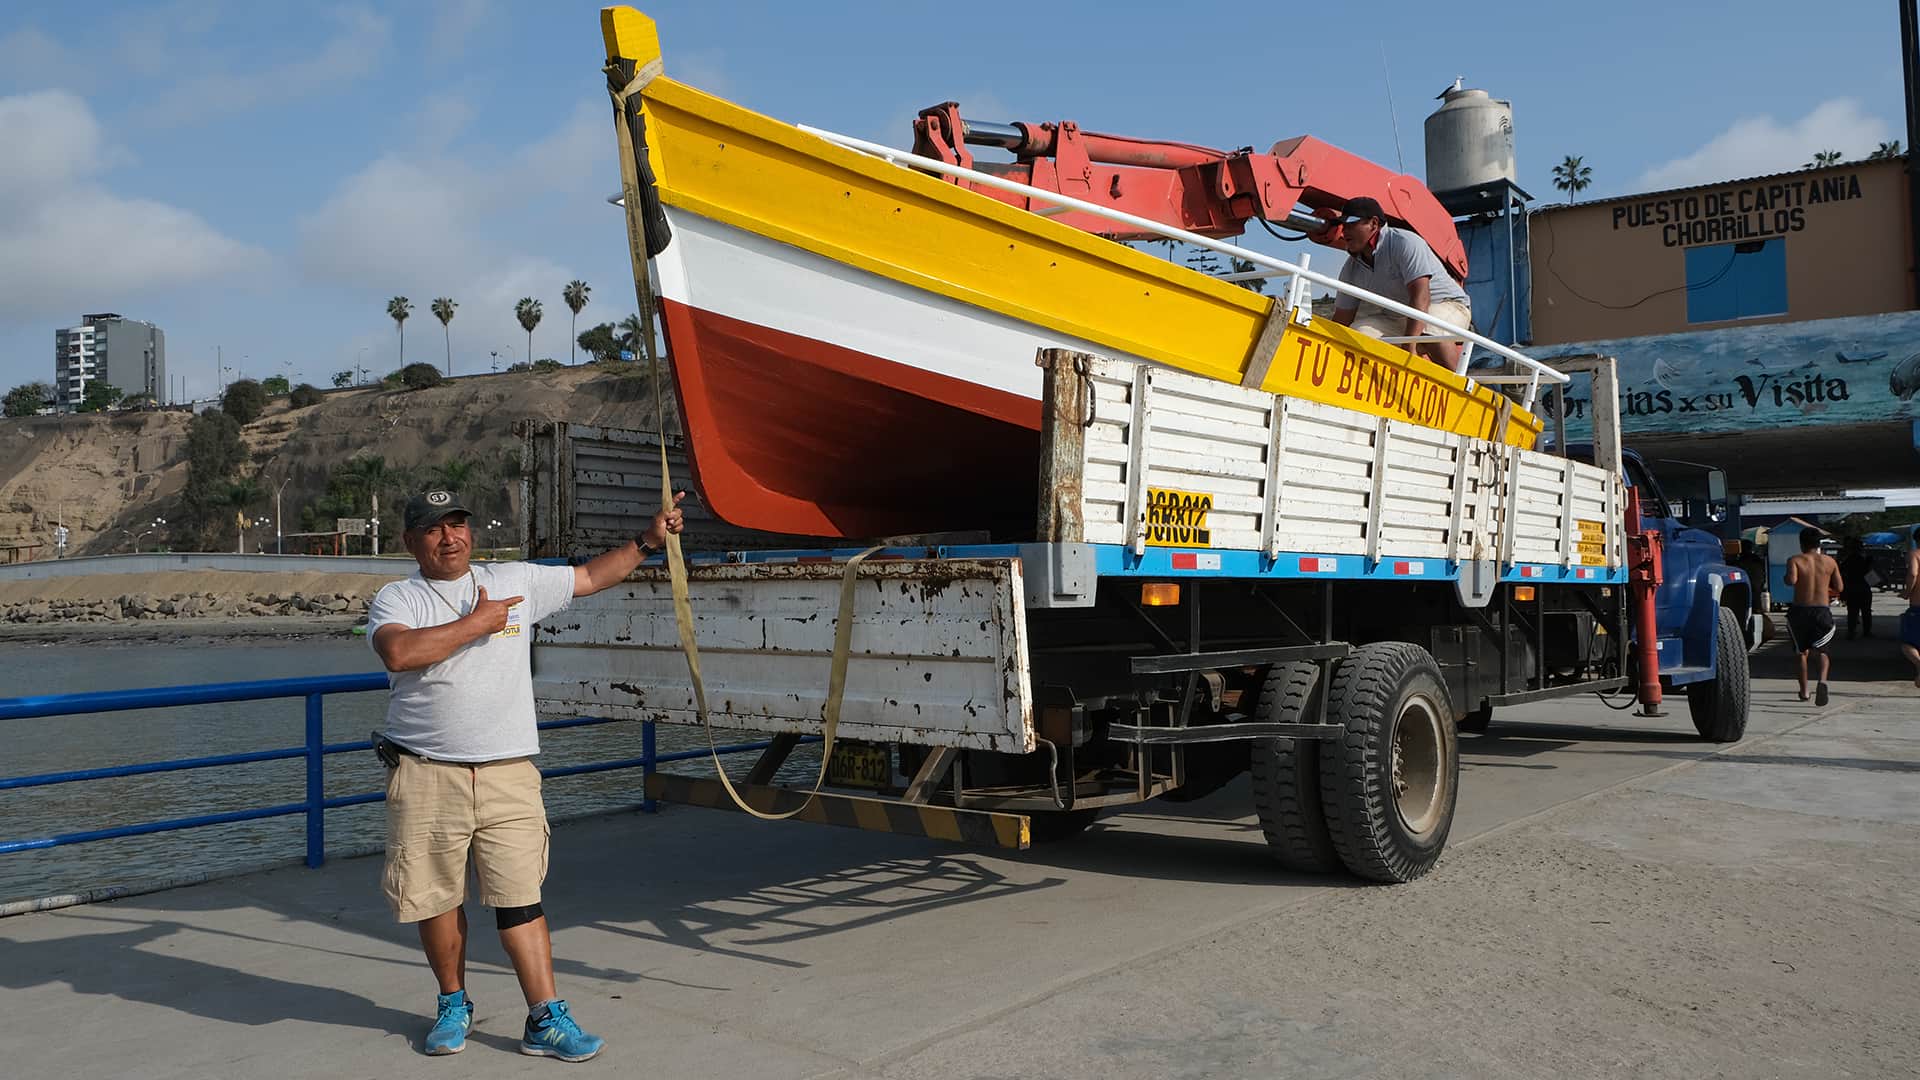 Fisherman proudly showing his brand new boat | Responsible Travel Peru